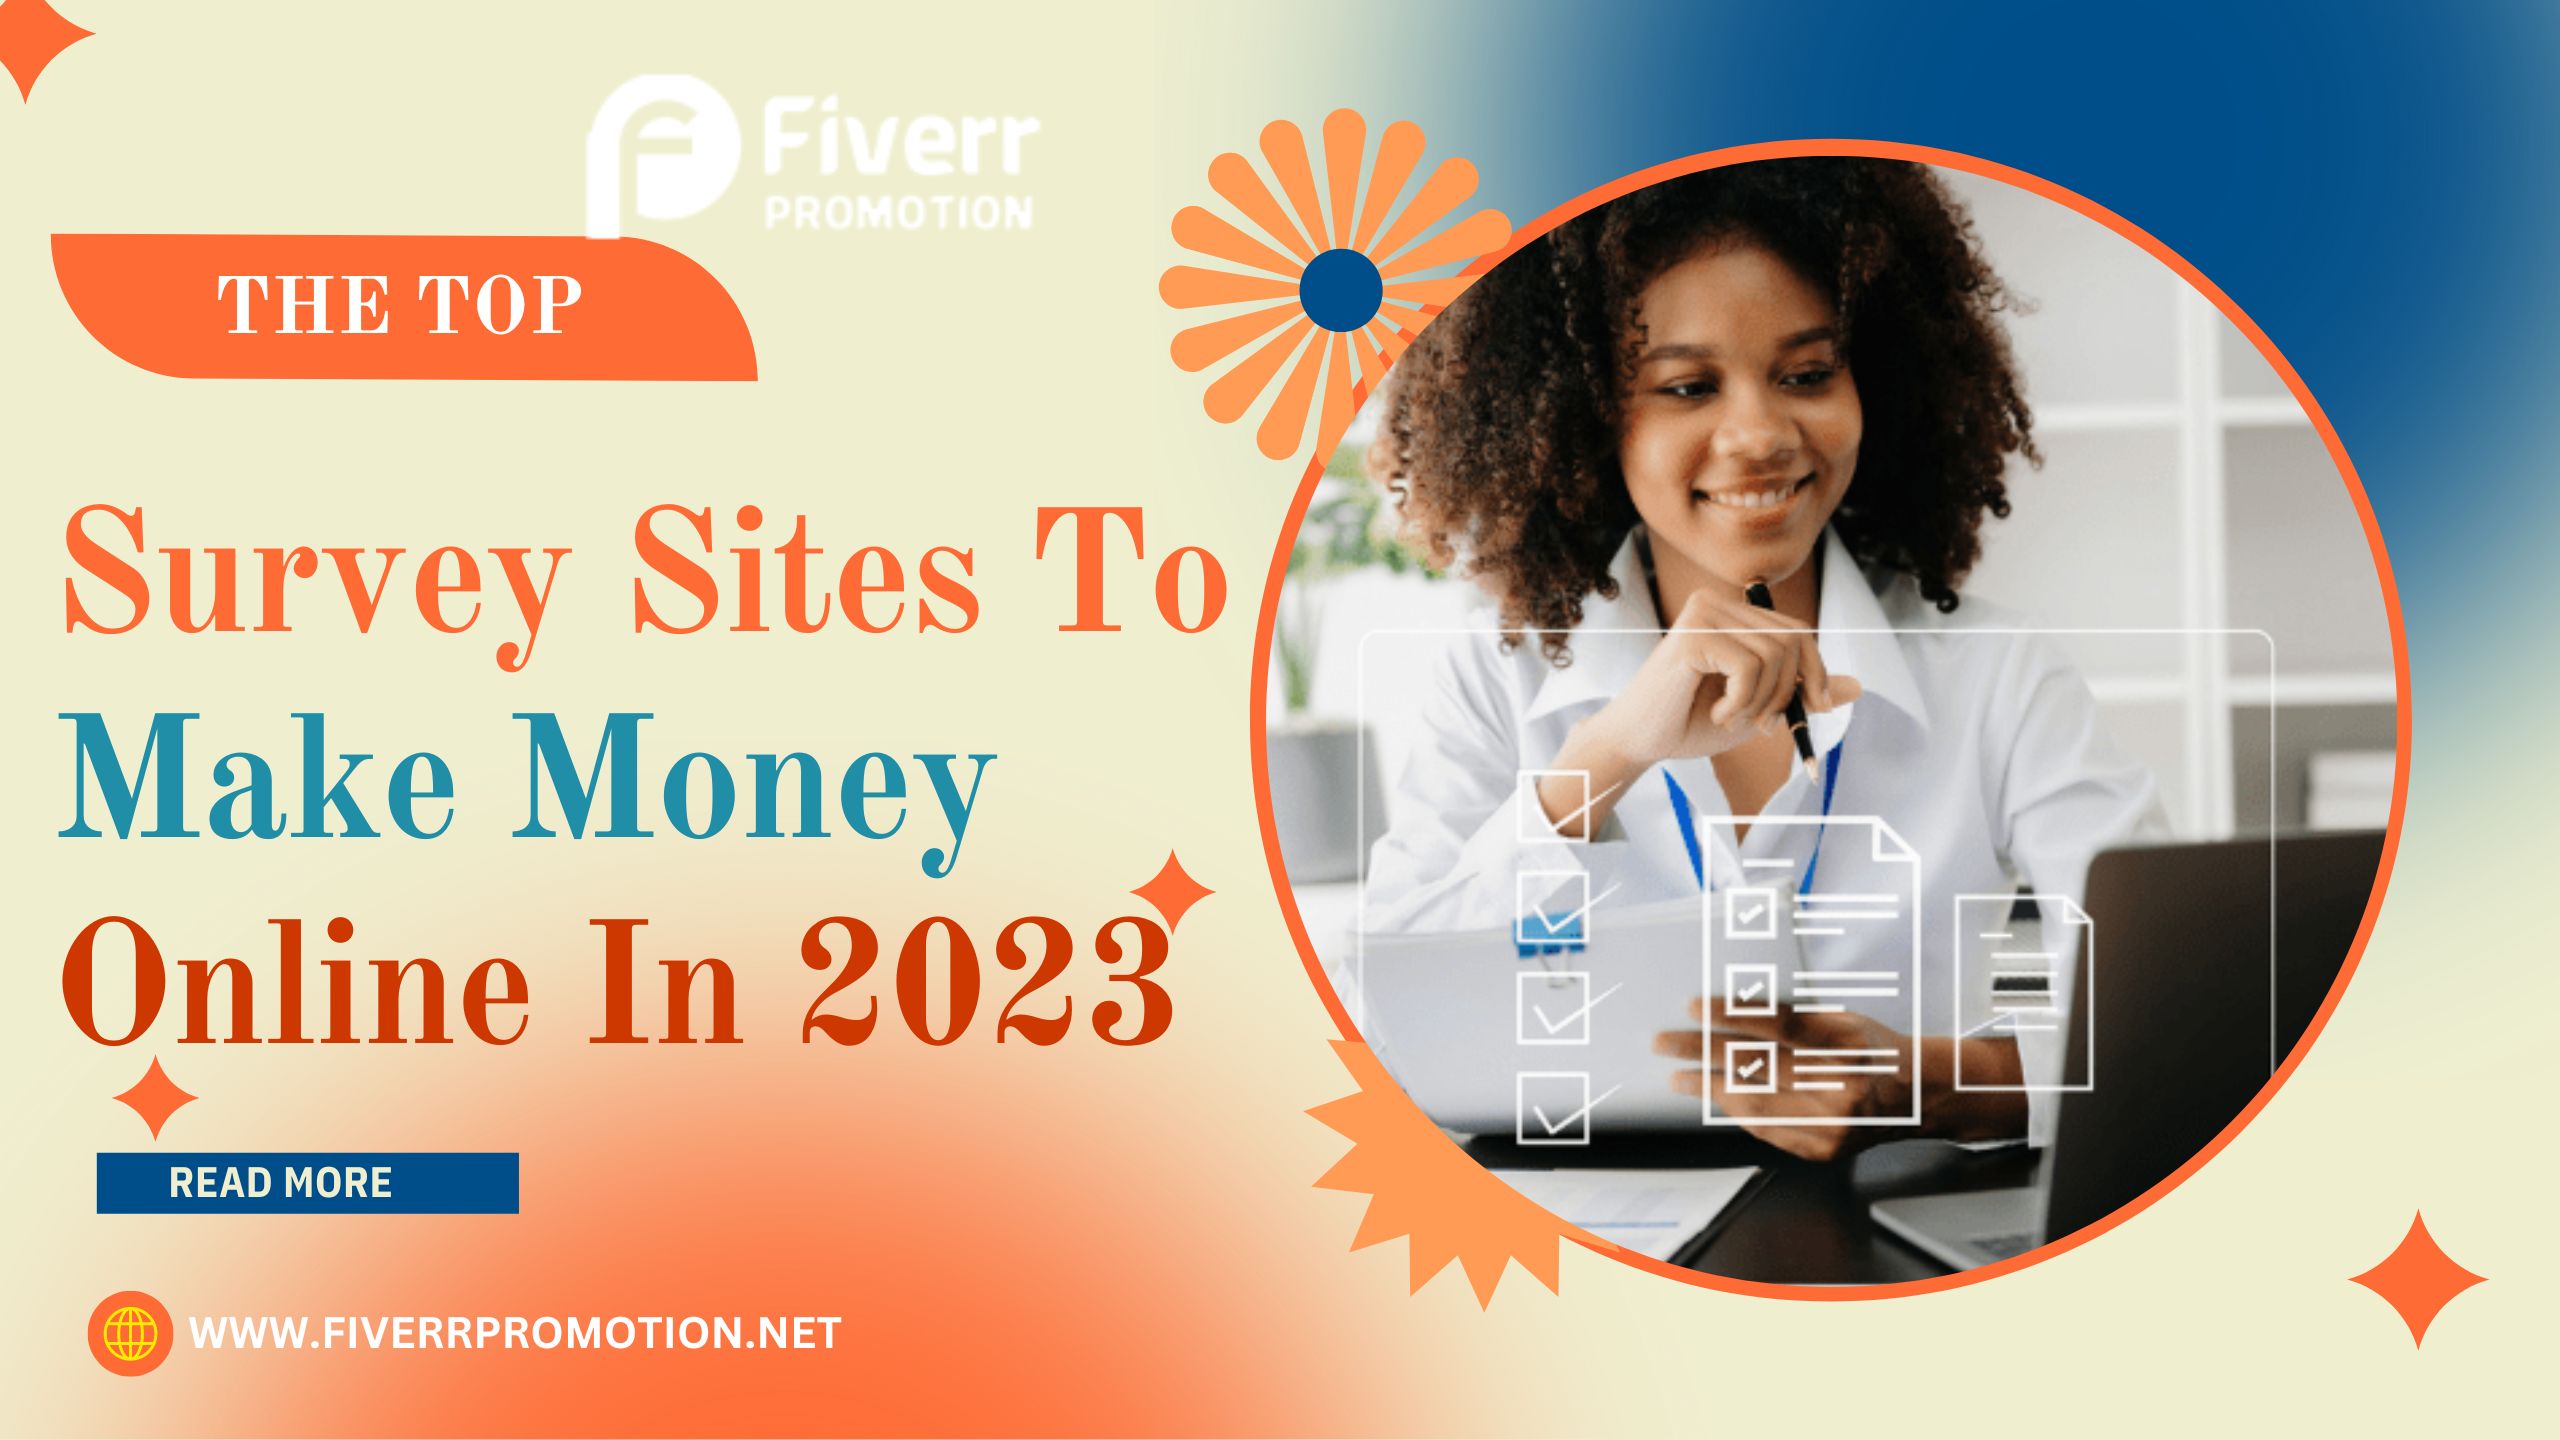 The Top Survey Sites to Make Money Online in 2023